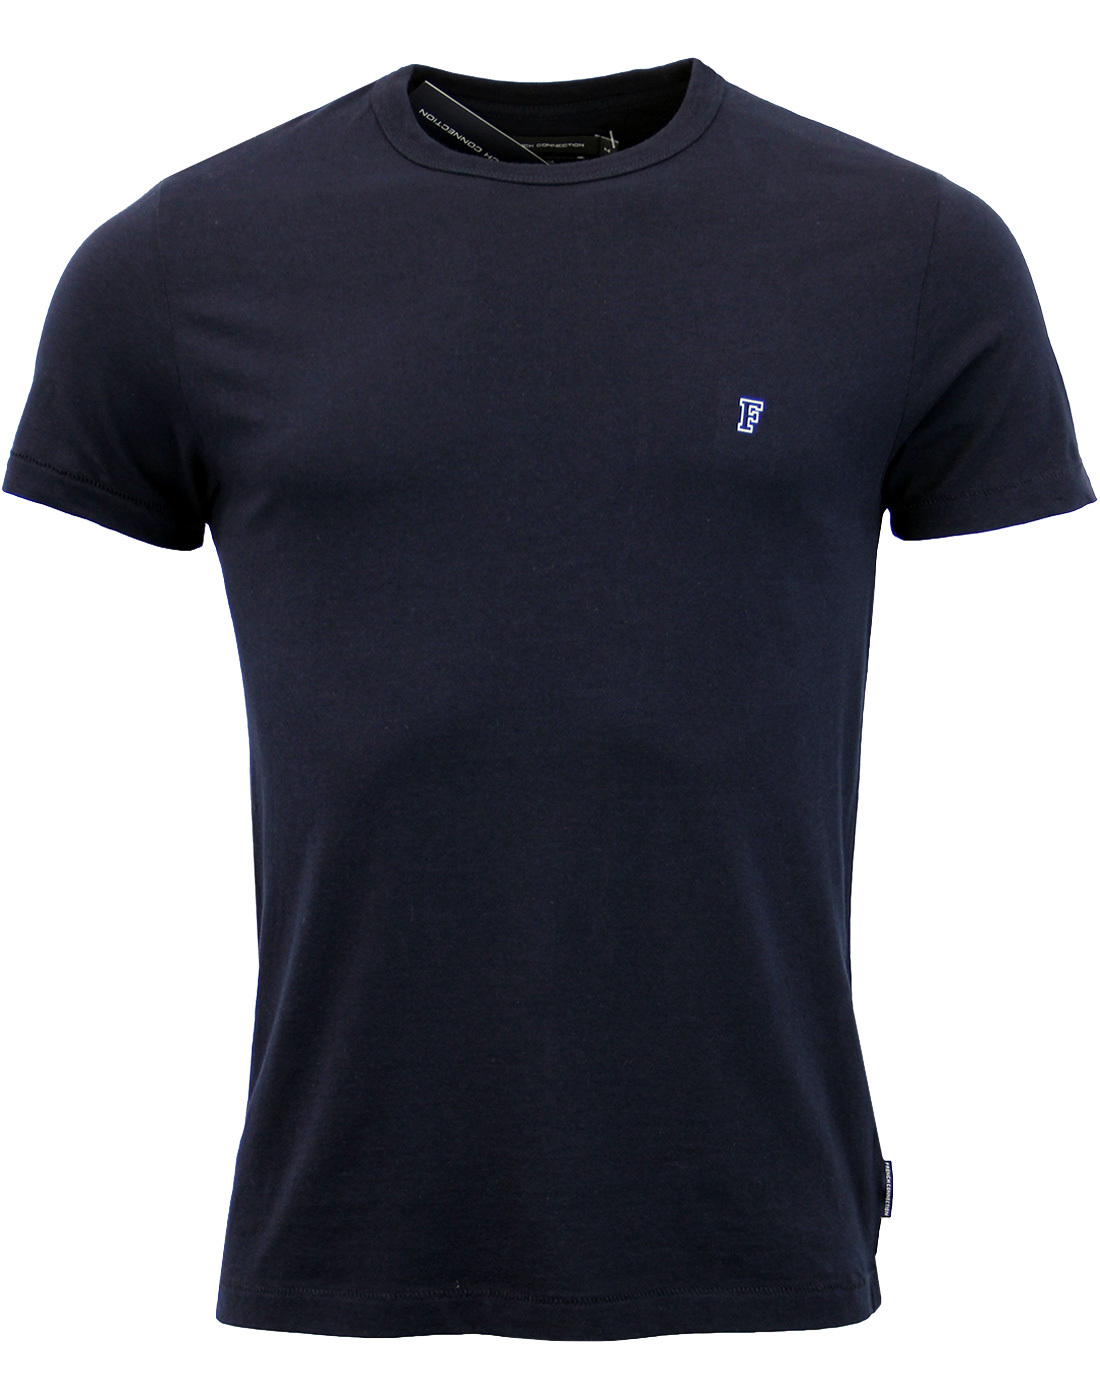 FRENCH CONNECTION Retro Slim Fit Crew Neck Tee in Marine